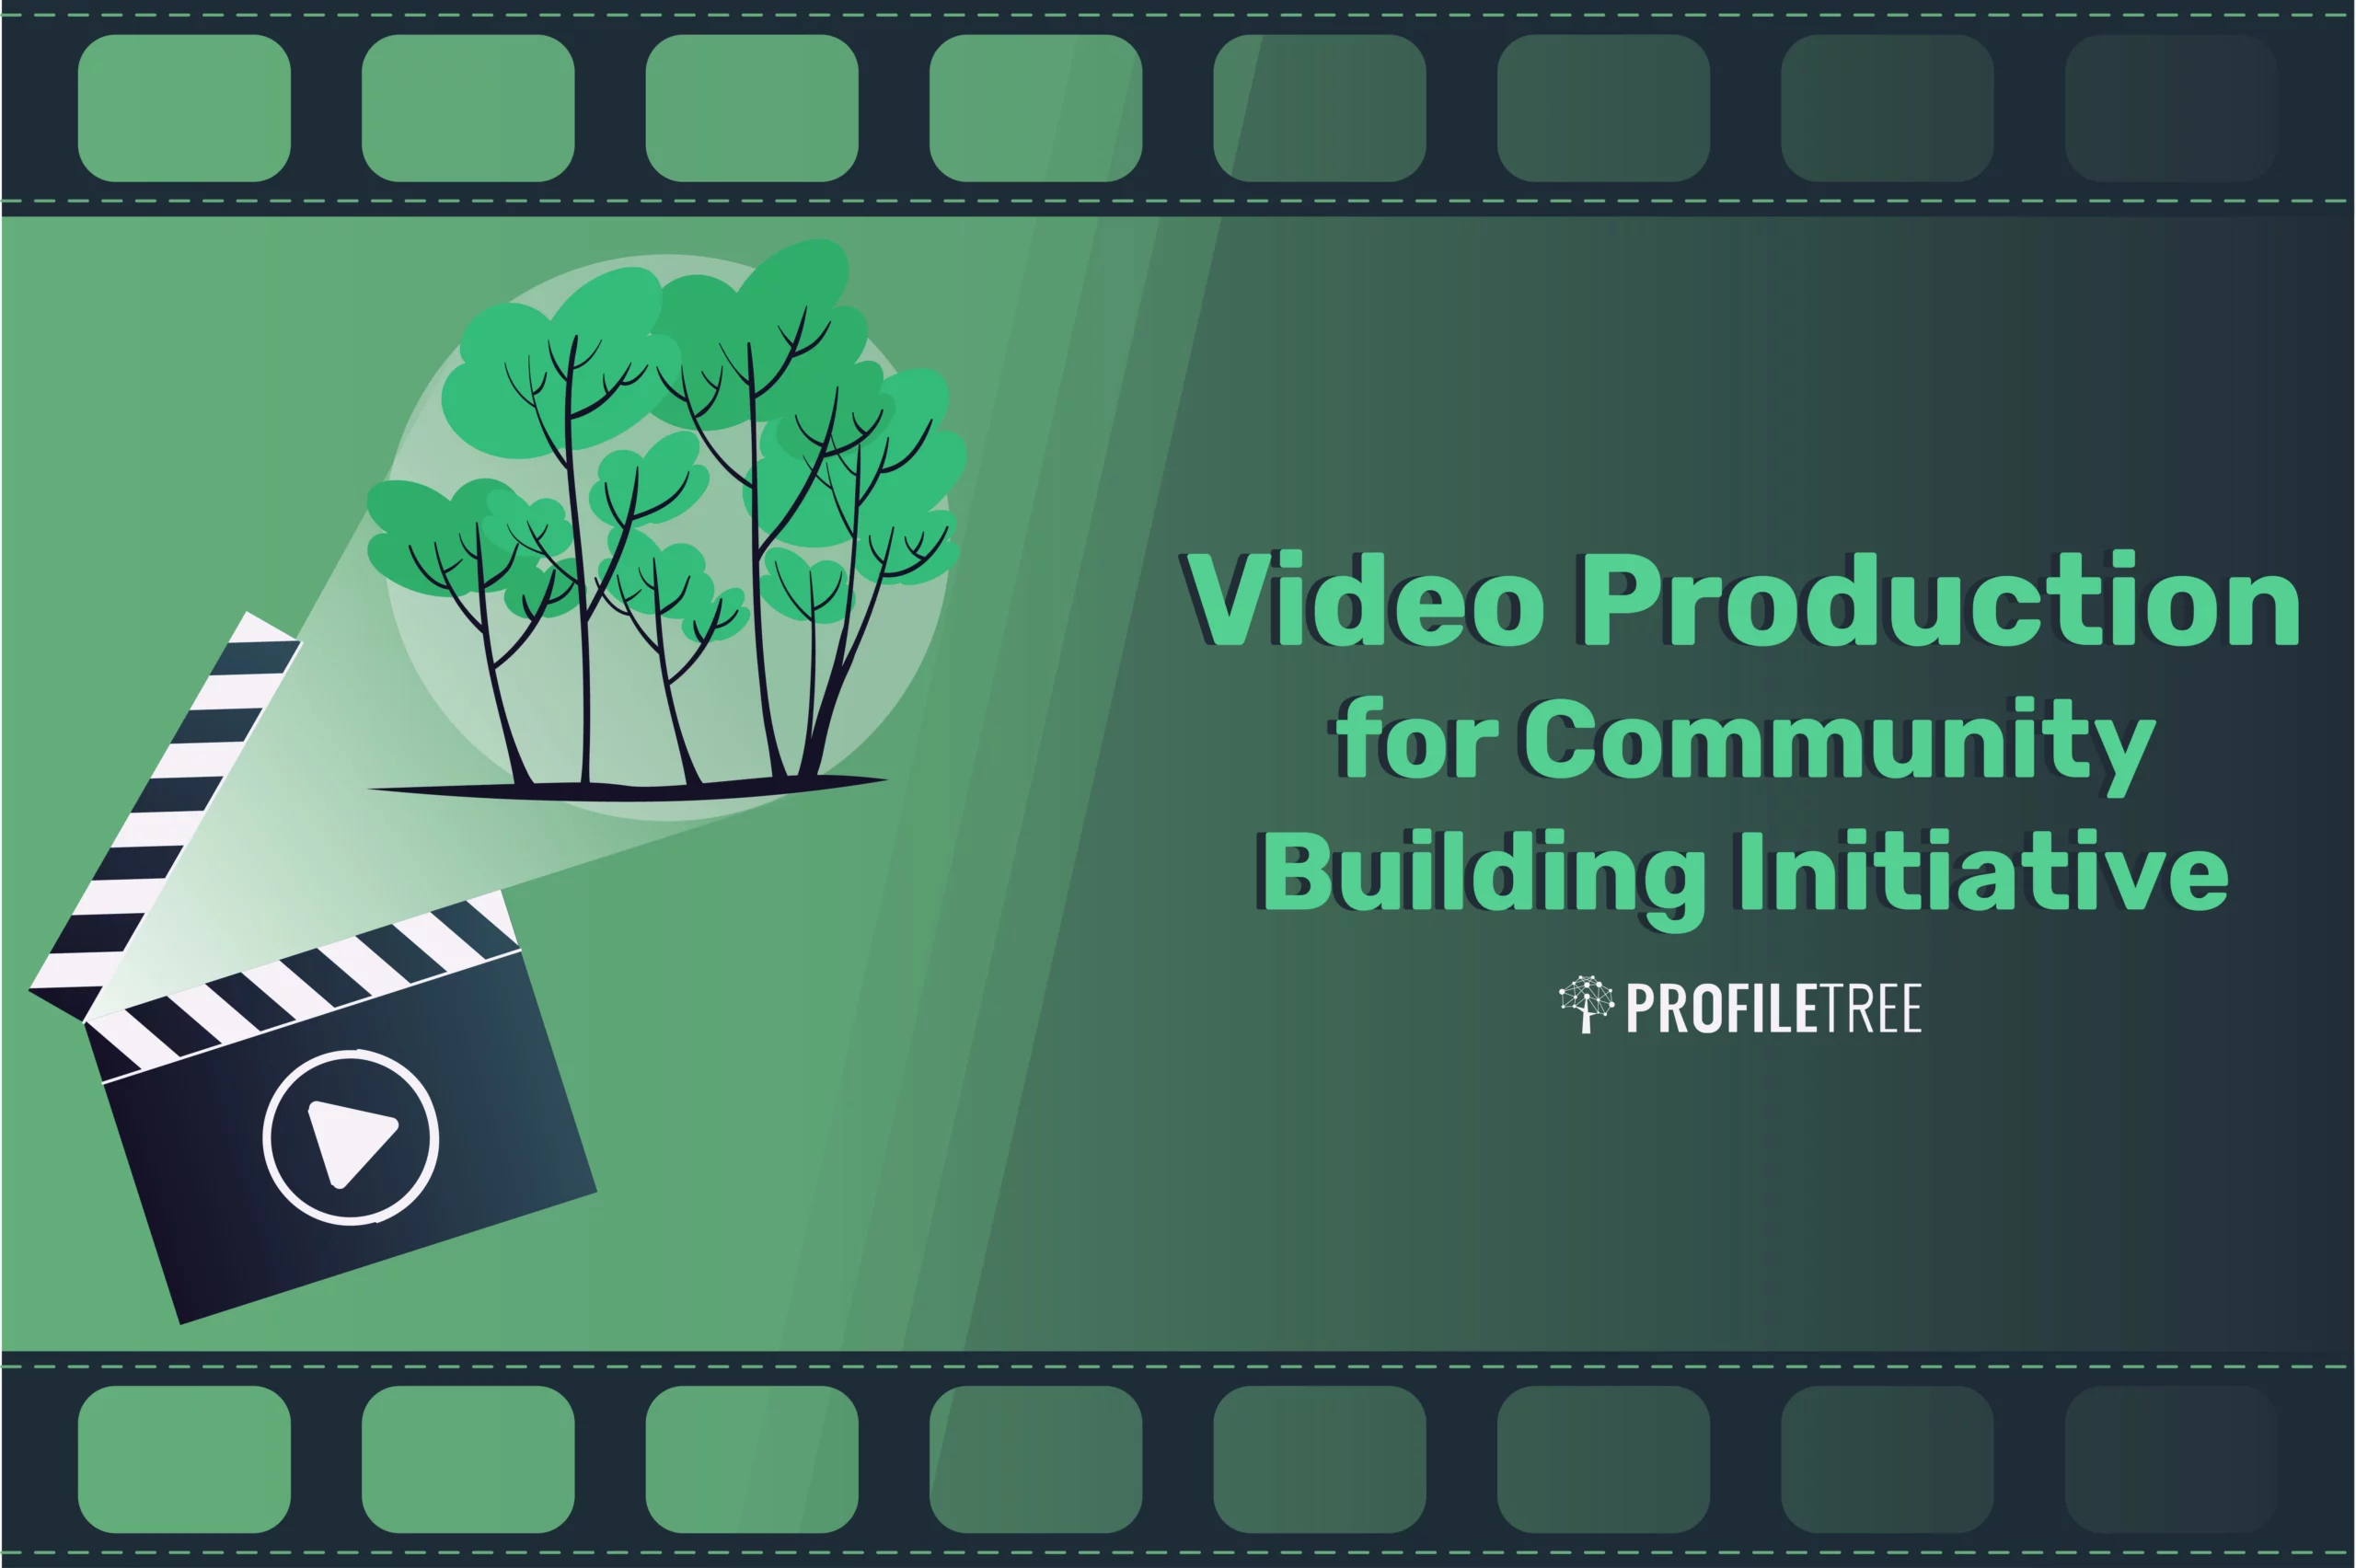 Video Production for Community Building Initiative